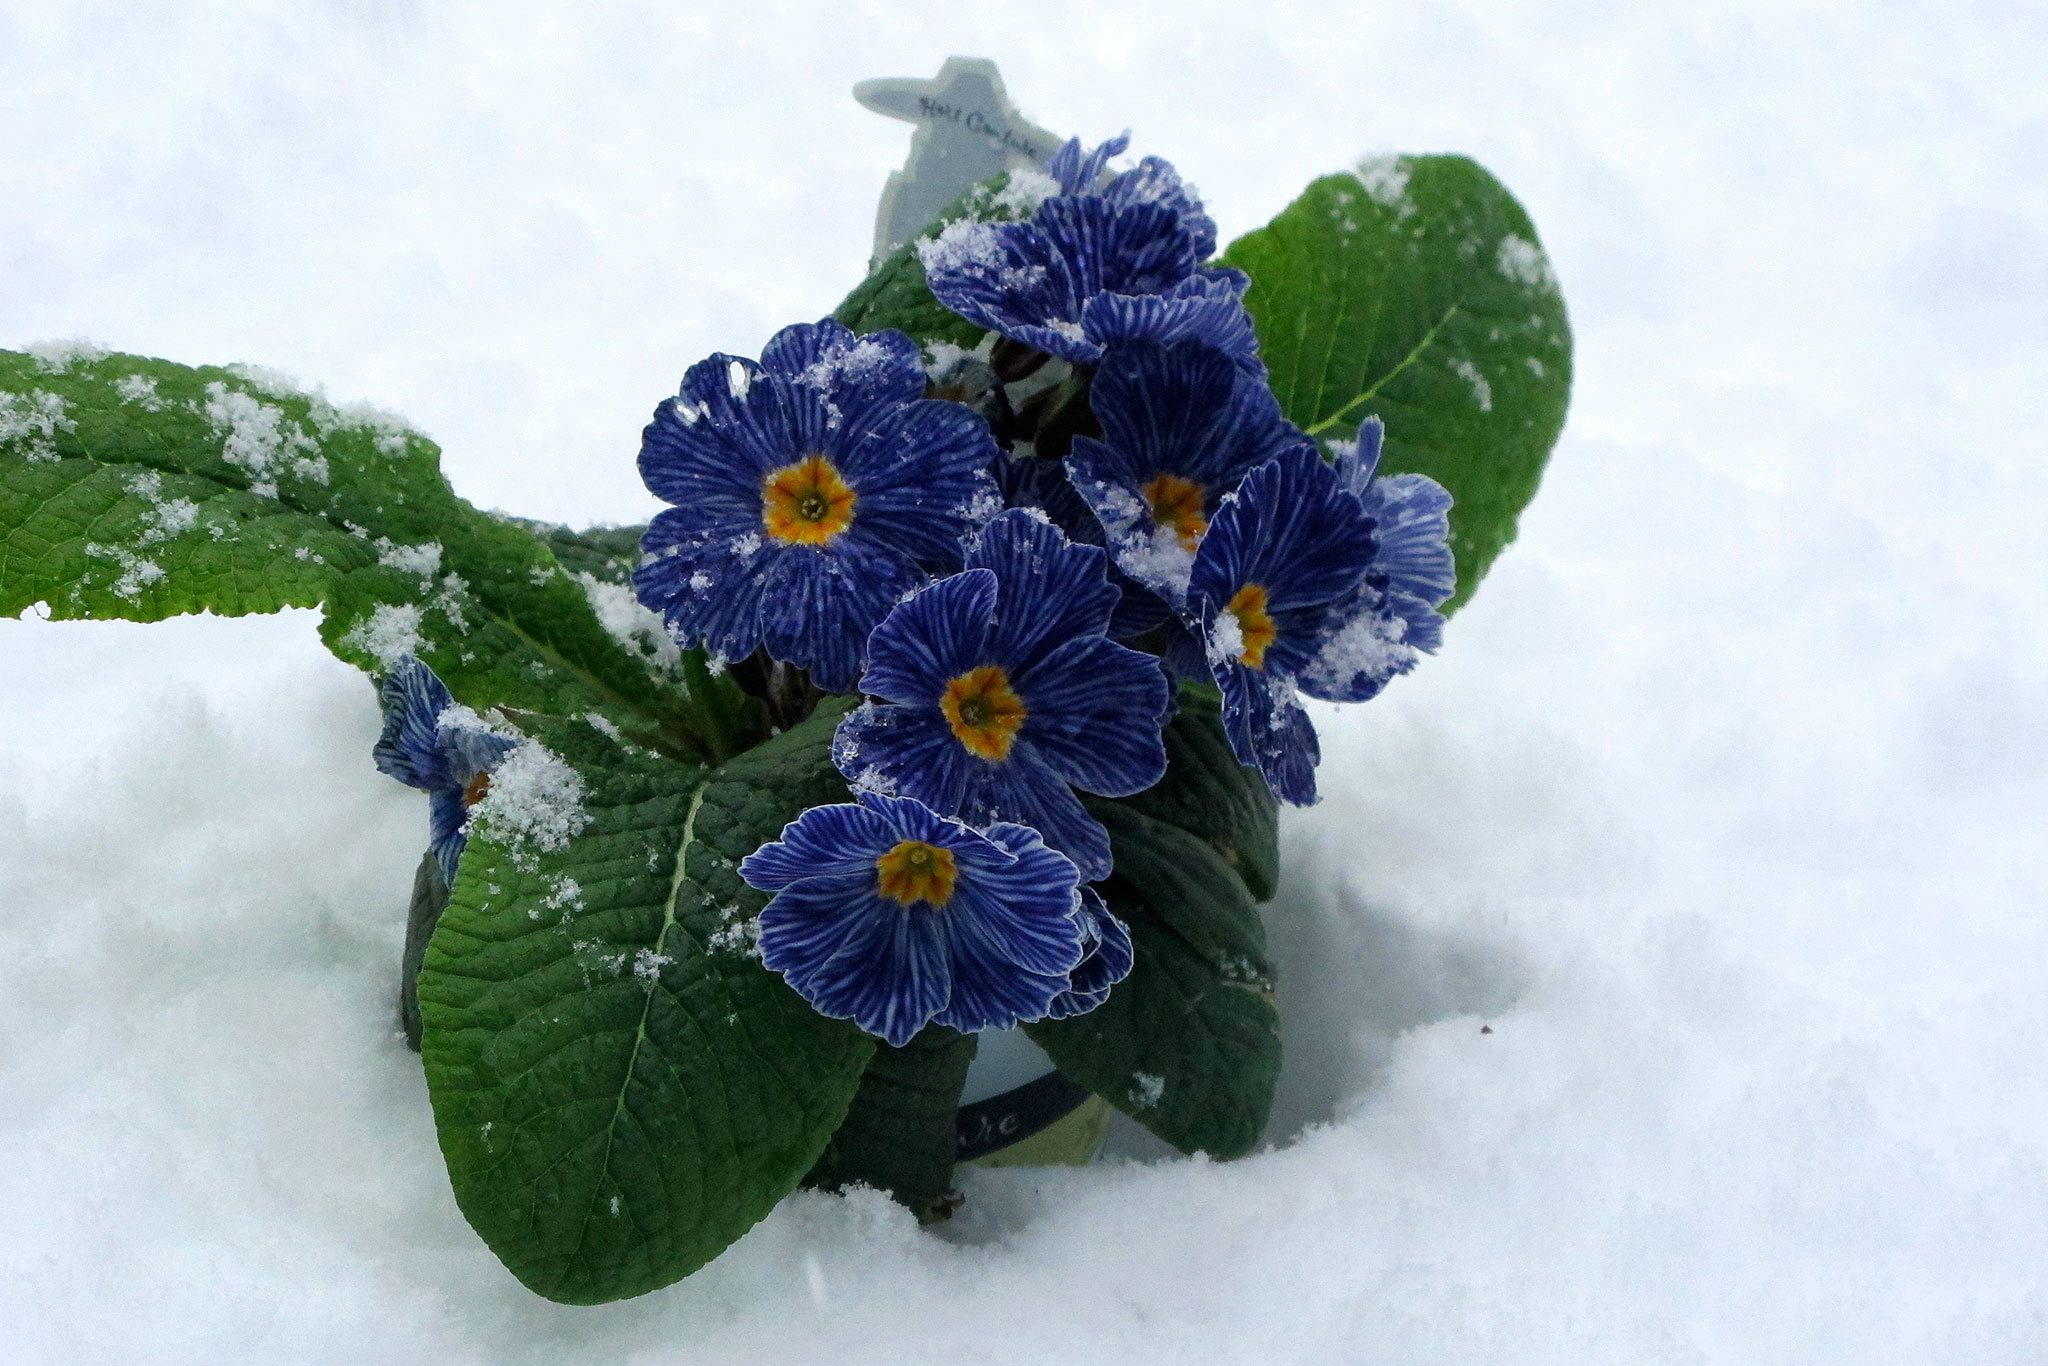 Bring new life to your garden by expanding your color palette. A blue primrose adds a nice pop. (Pam Roy)